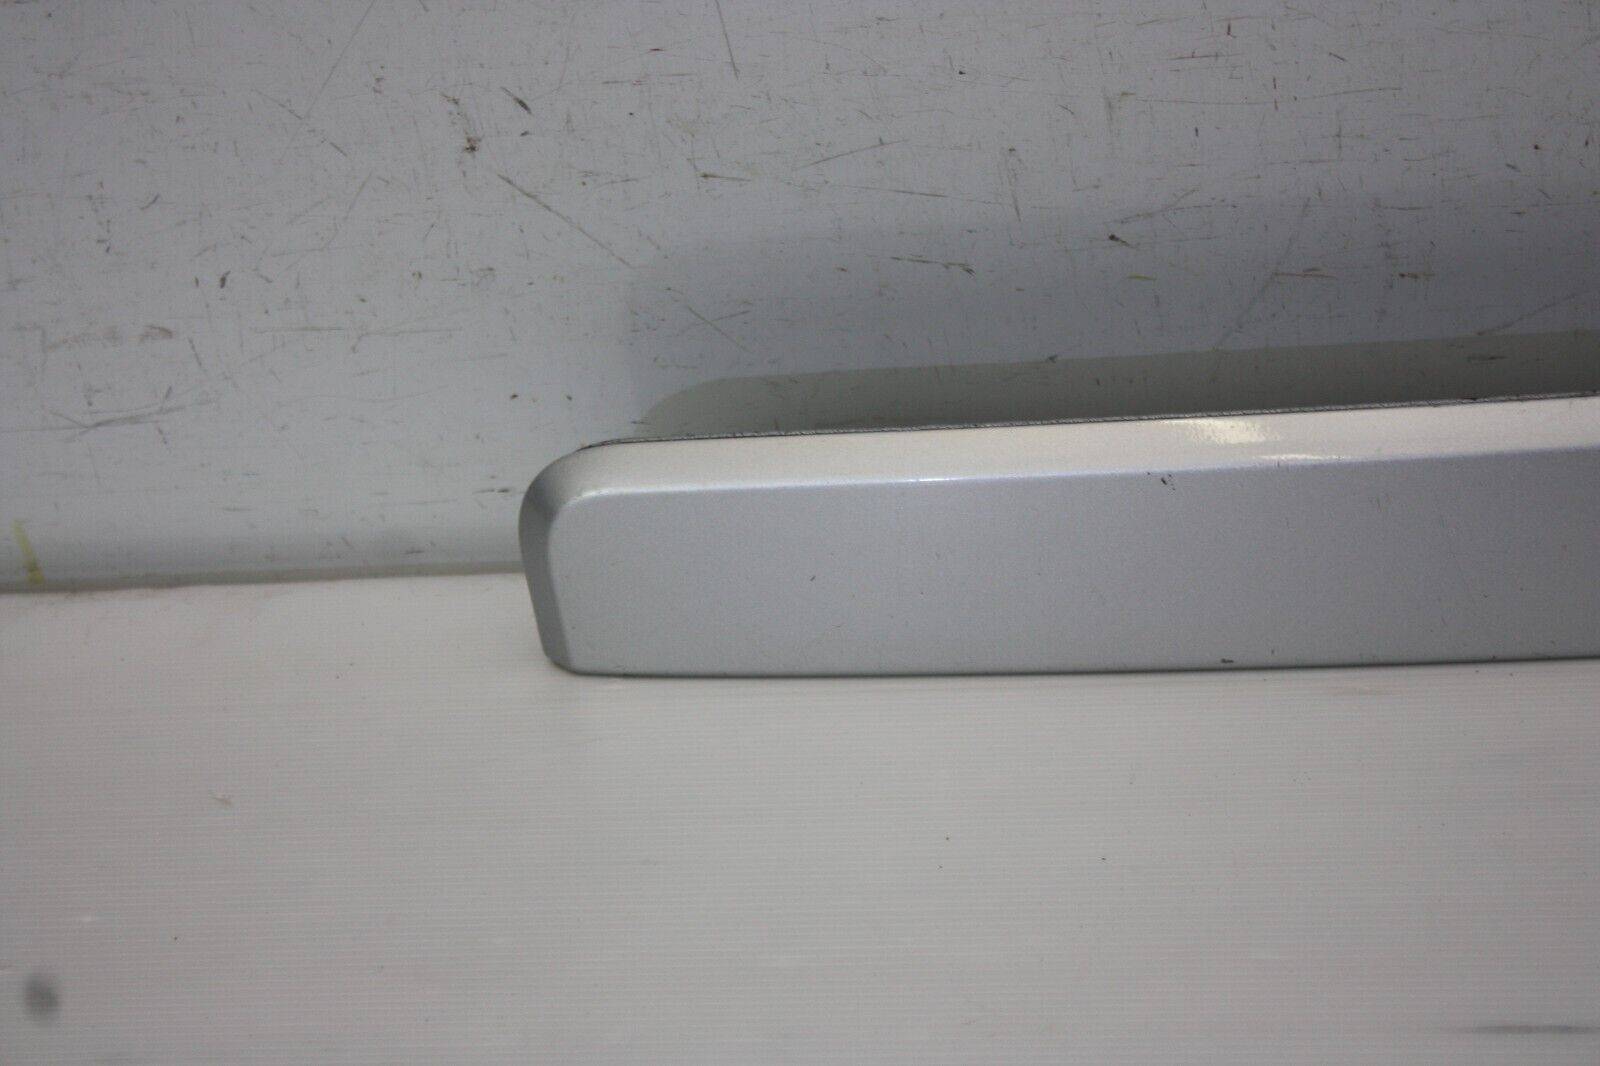 VW-Transporter-Rear-Trunk-Boot-Lid-Handle-2015-TO-2020-7E0827574H-Genuine-175613135805-2